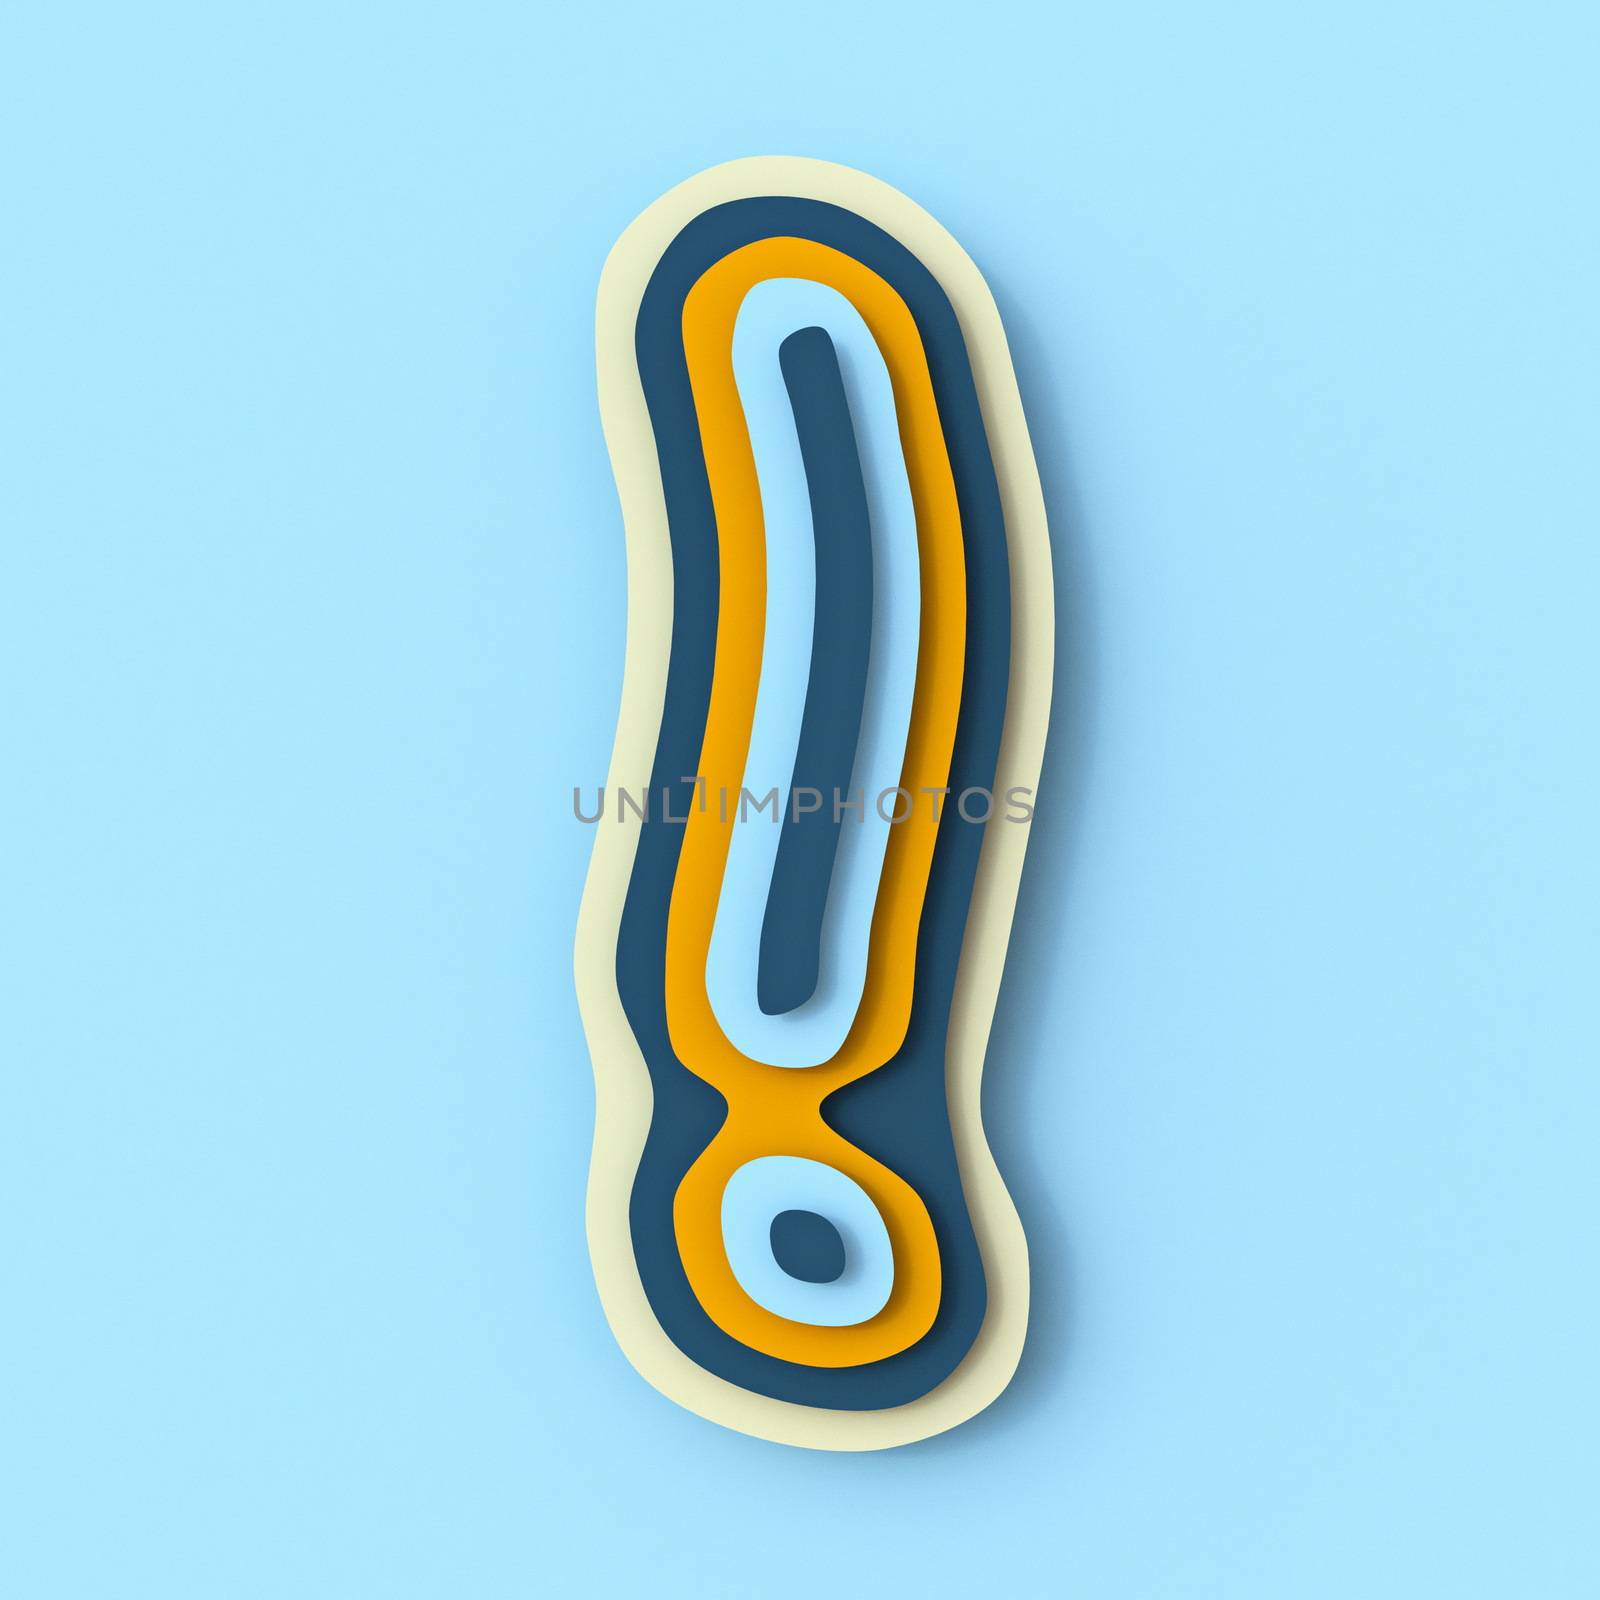 Colorful paper layers font exclamation mark 3D render illustration isolated on blue background